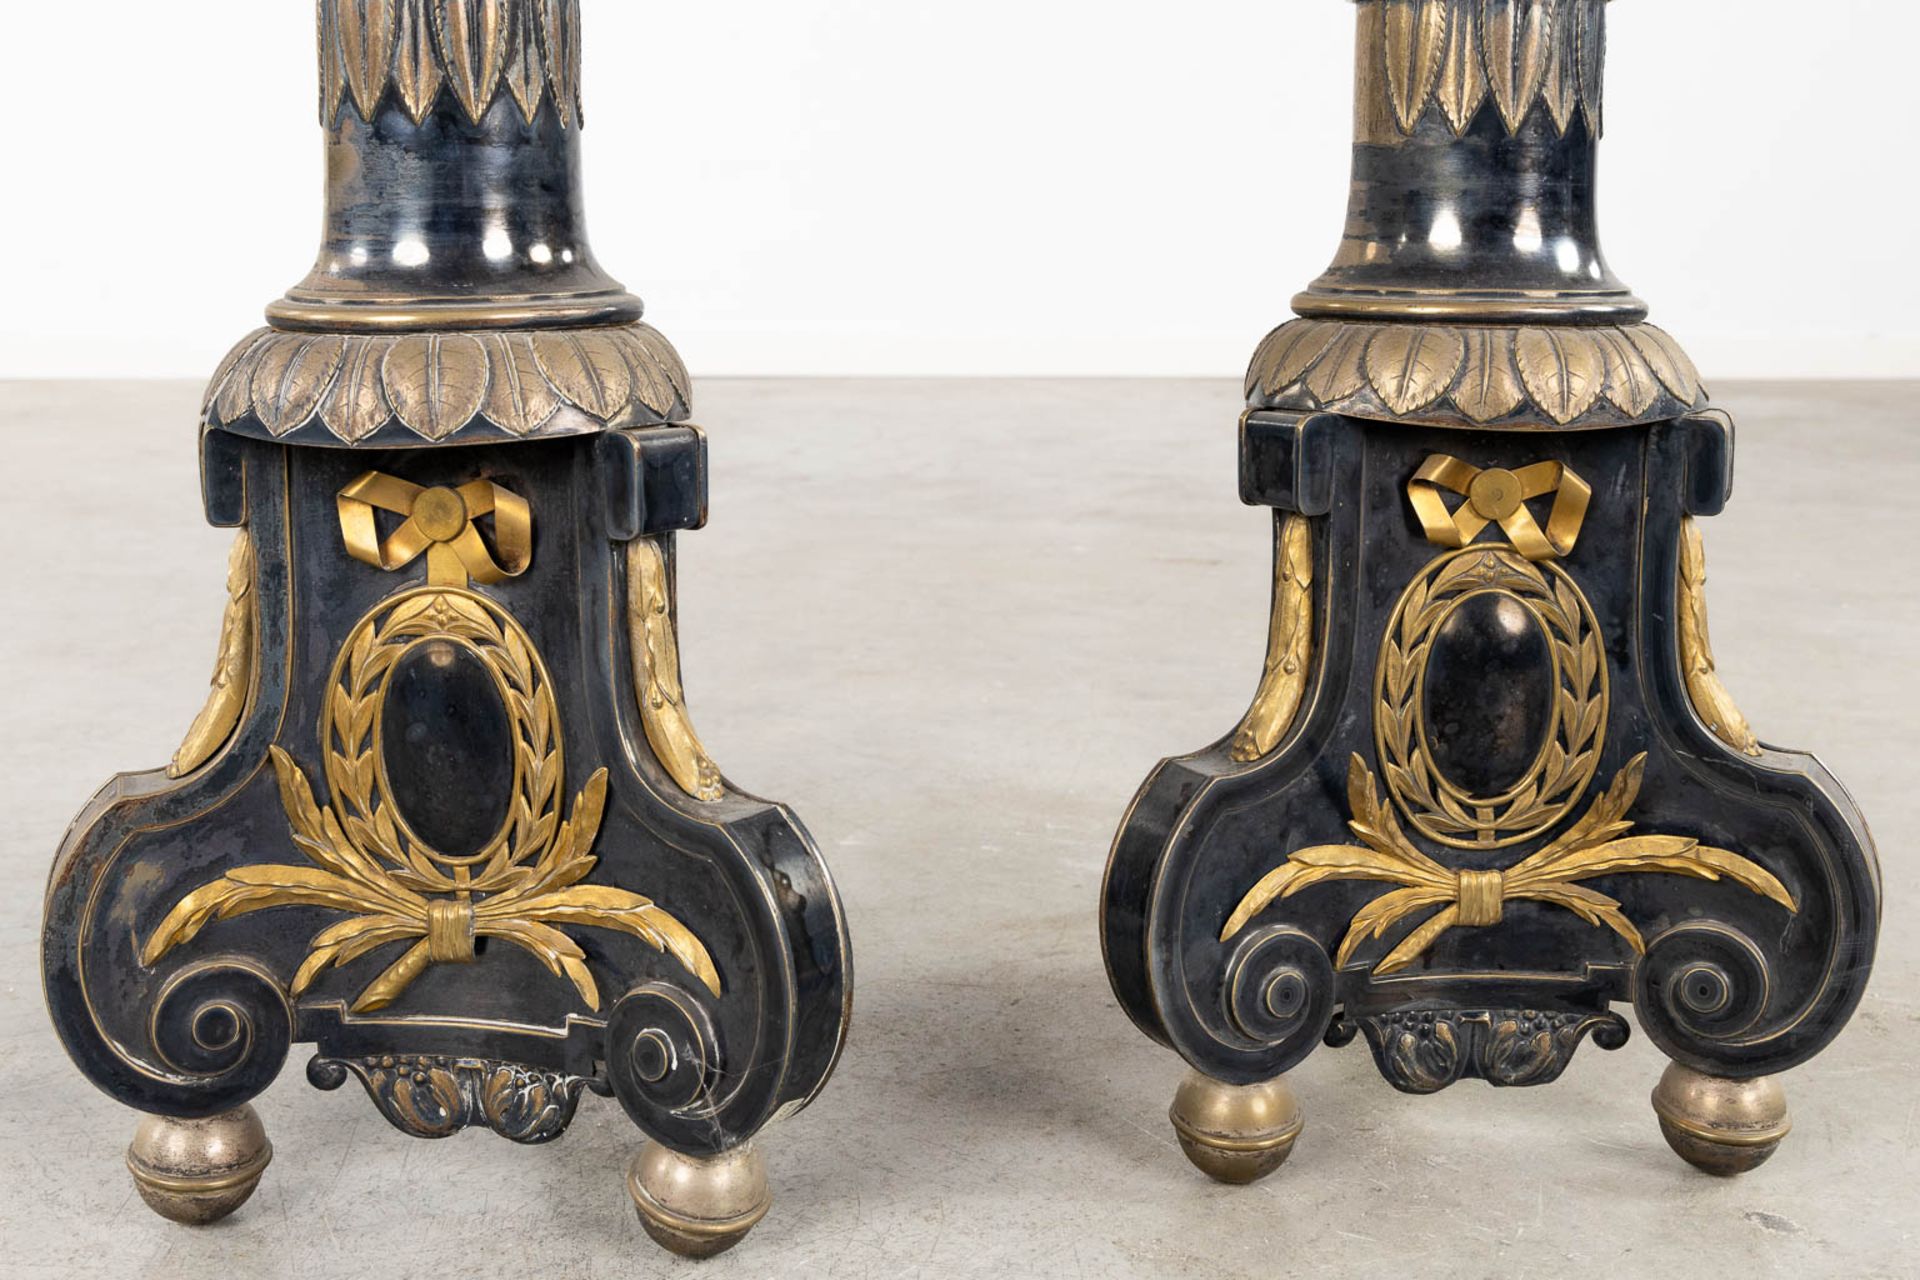 A pair of Church Candlesticks, silver- and gold-plated metal. 19th C. (H:120 cm) - Image 8 of 9